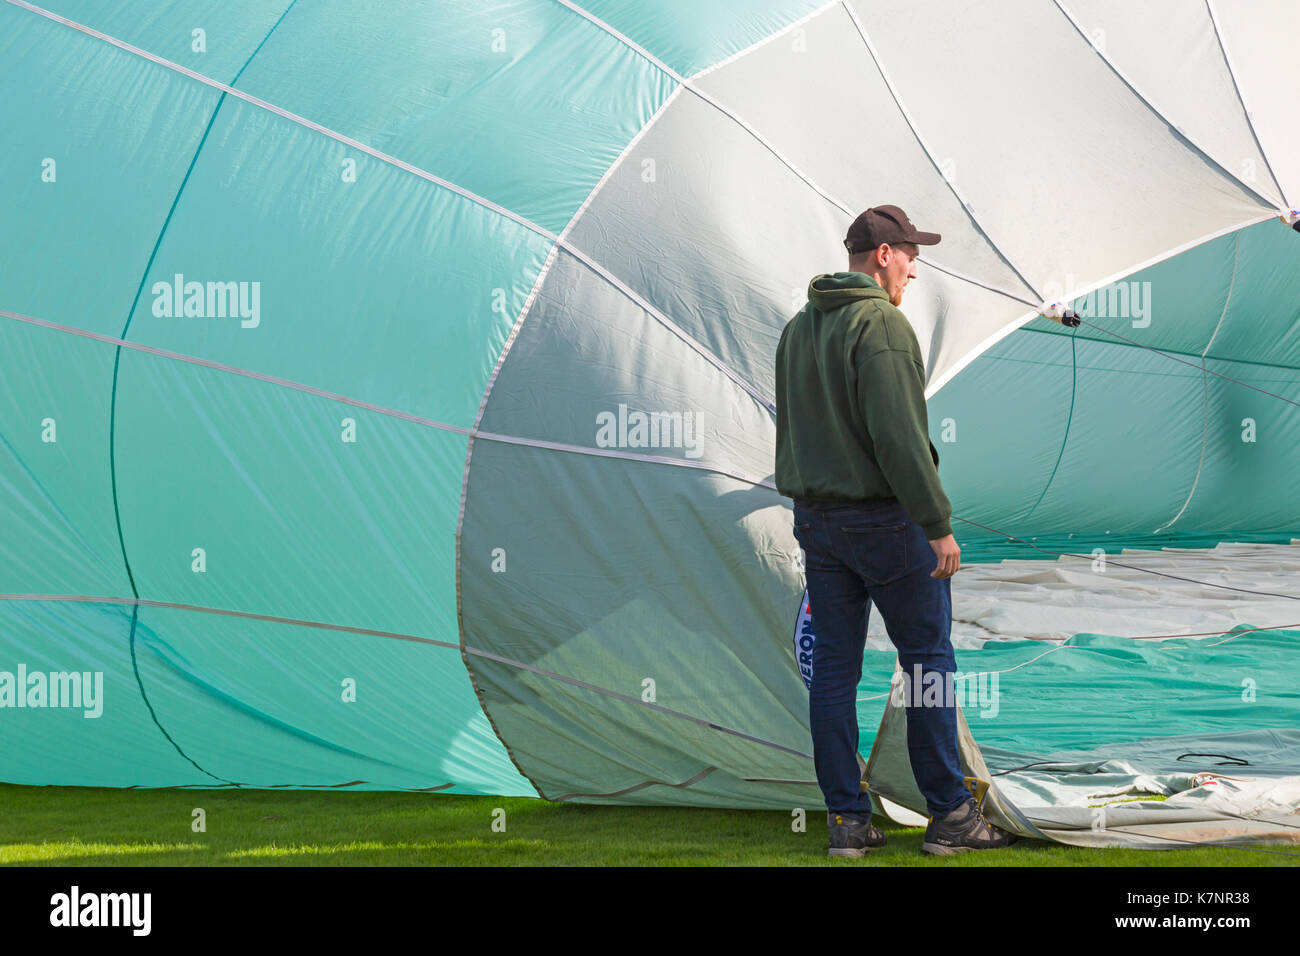 Man standing by turquoise hot air balloon on ground being inflated at Sky Safari hot air balloons festival at Longleat, Wiltshire UK in September Stock Photo